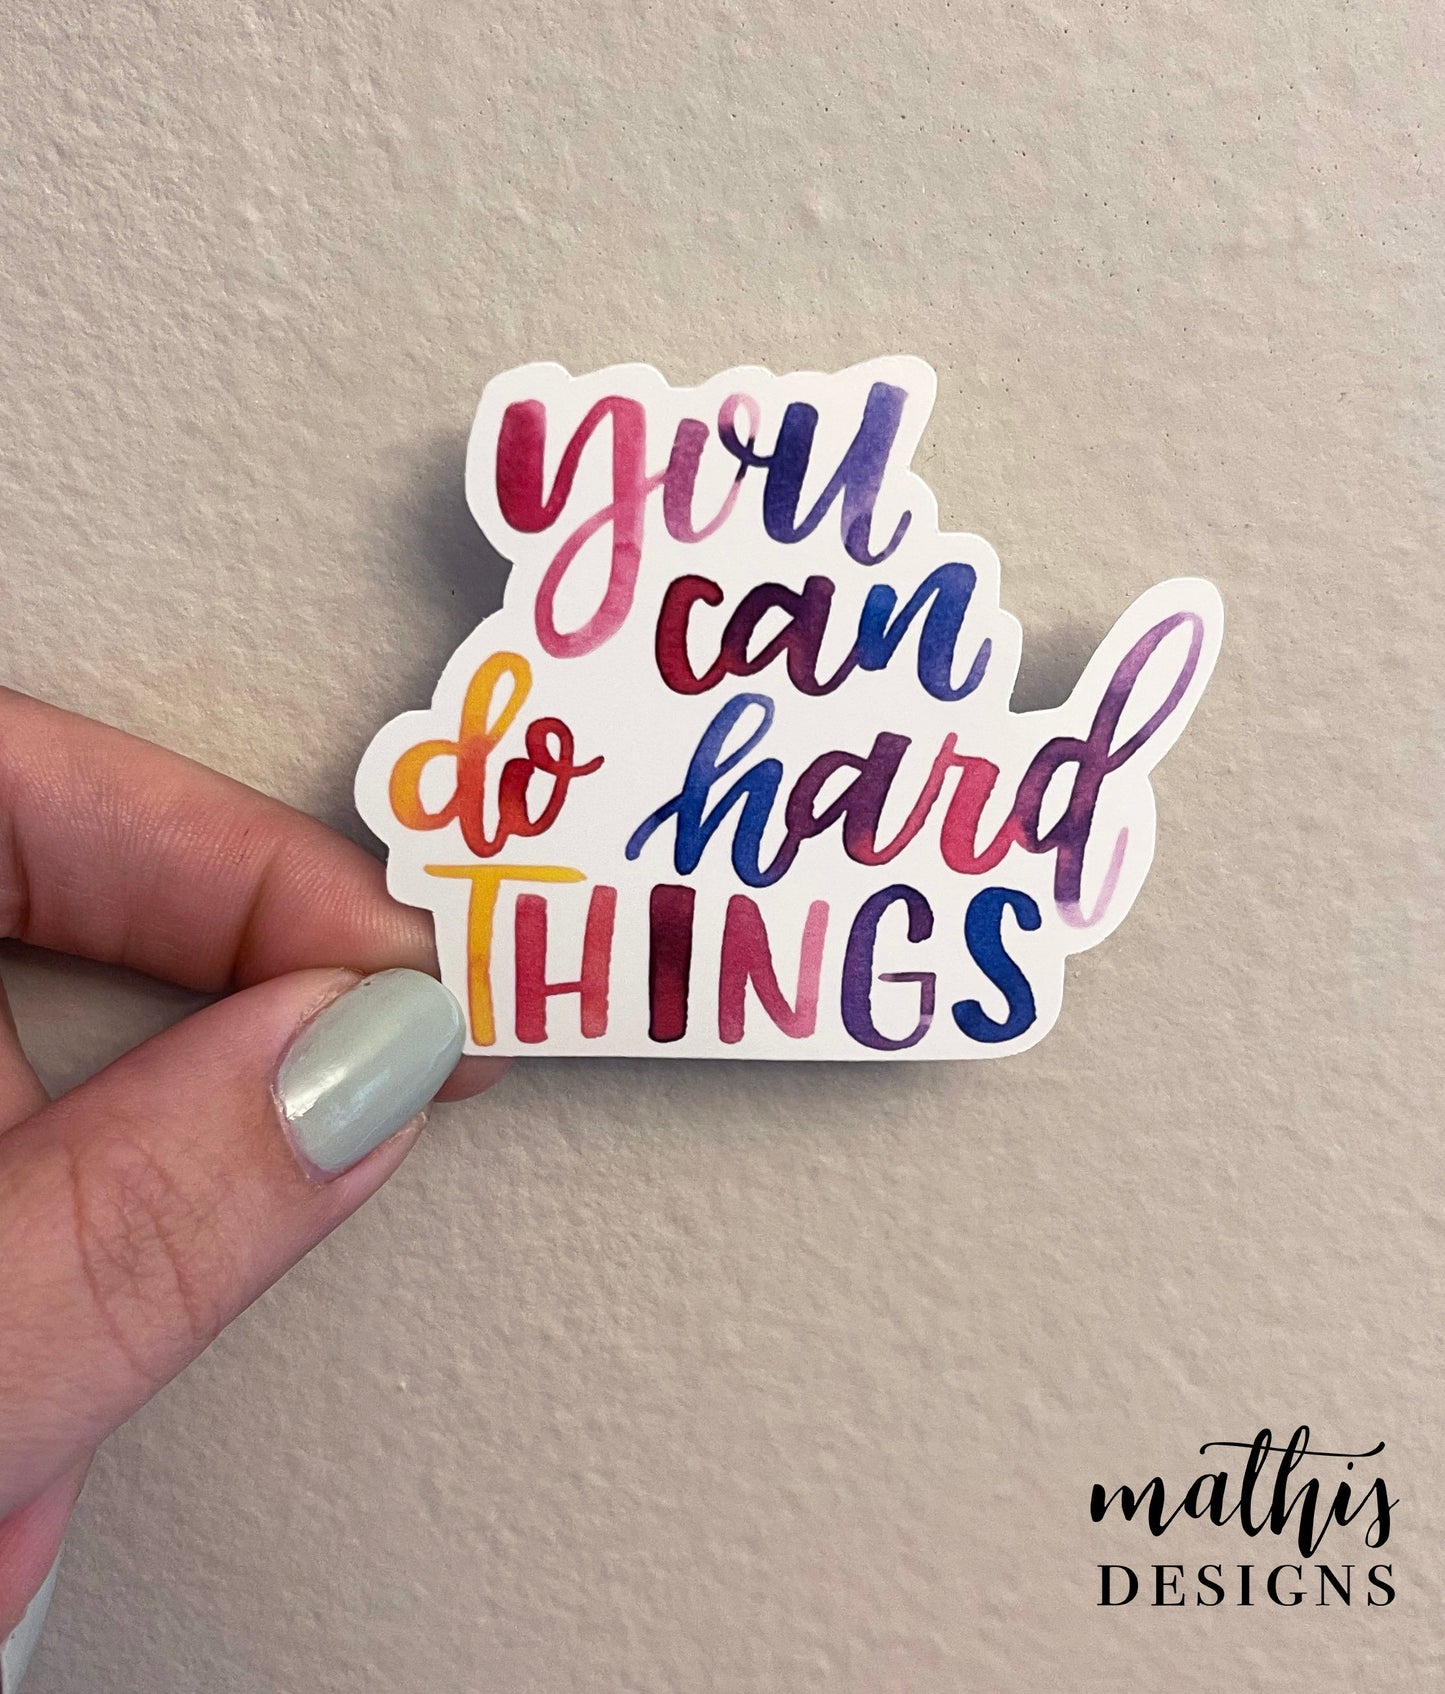 You Can Do Hard Things Sticker, Motivational Sticker, Fitness Inspiration Decal, Health and Wellness Sticker, Gift